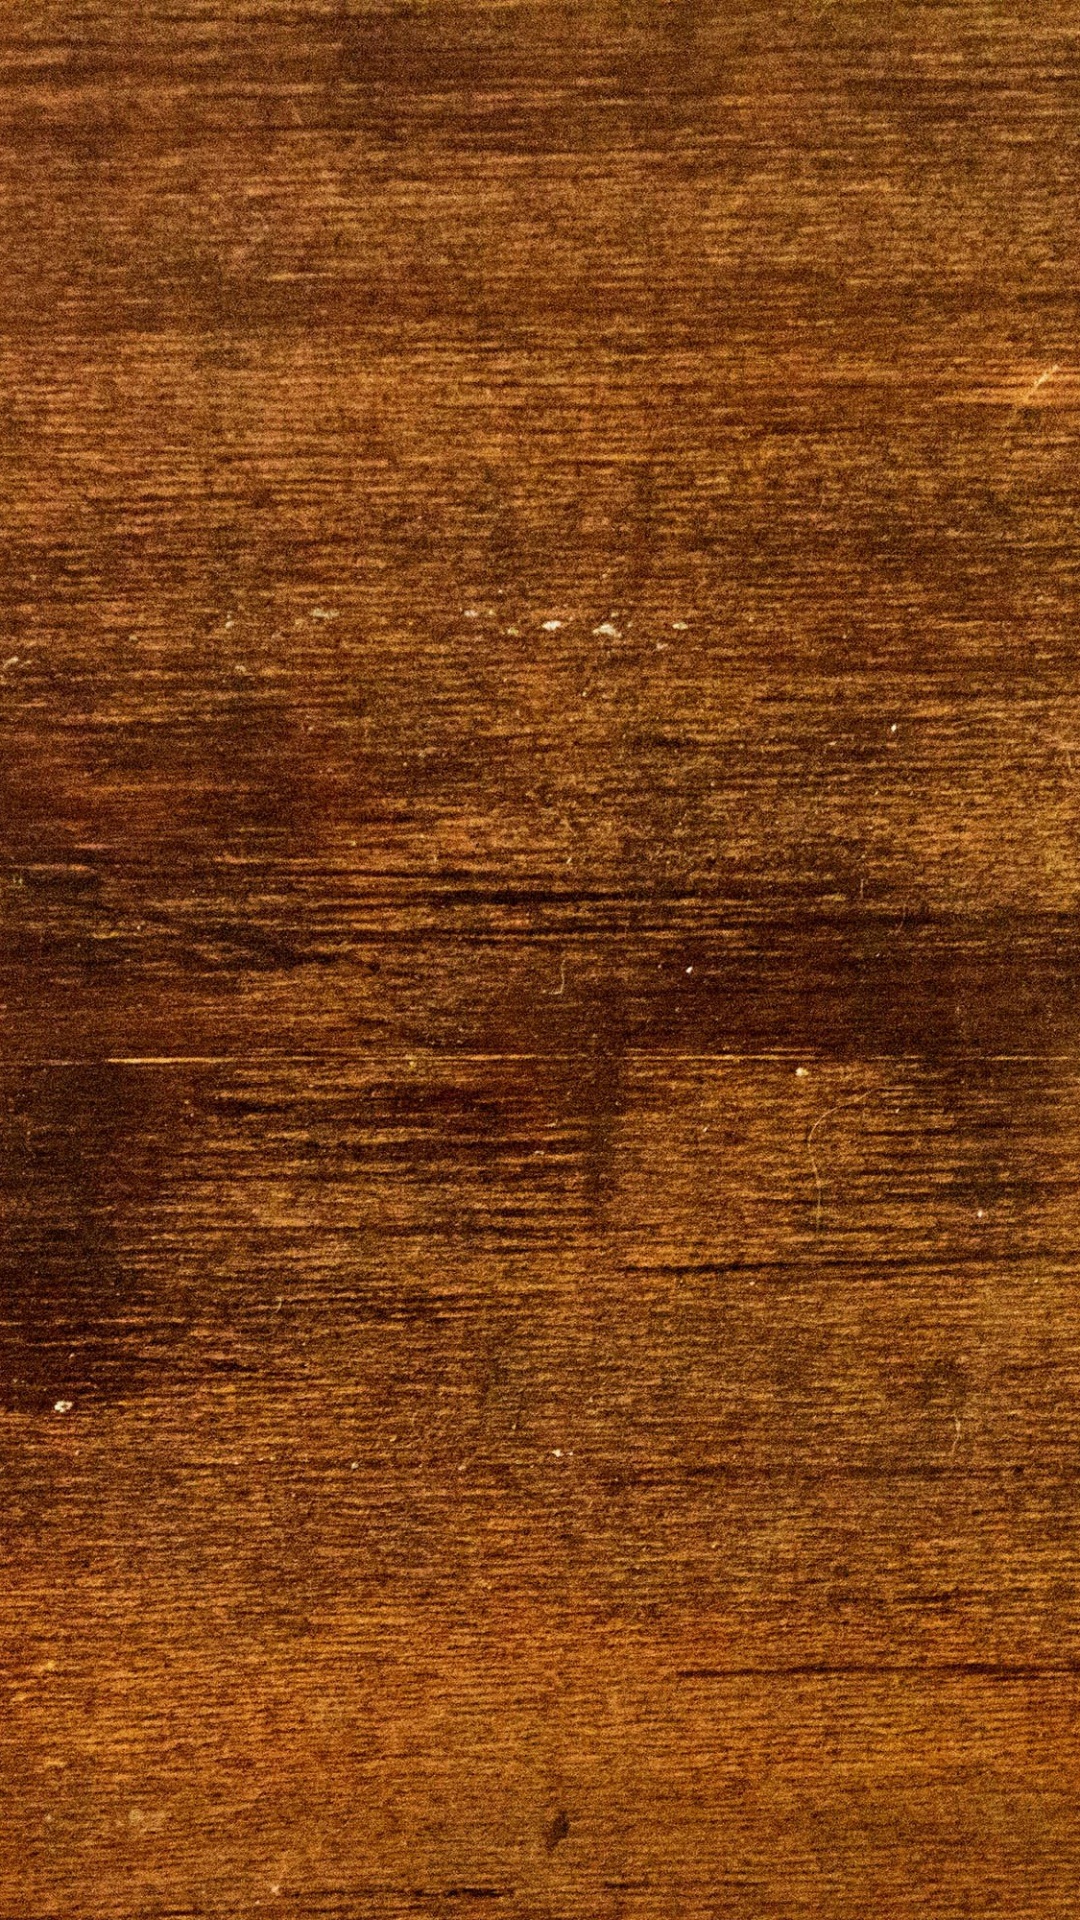 Brown and Black Wooden Surface. Wallpaper in 1080x1920 Resolution